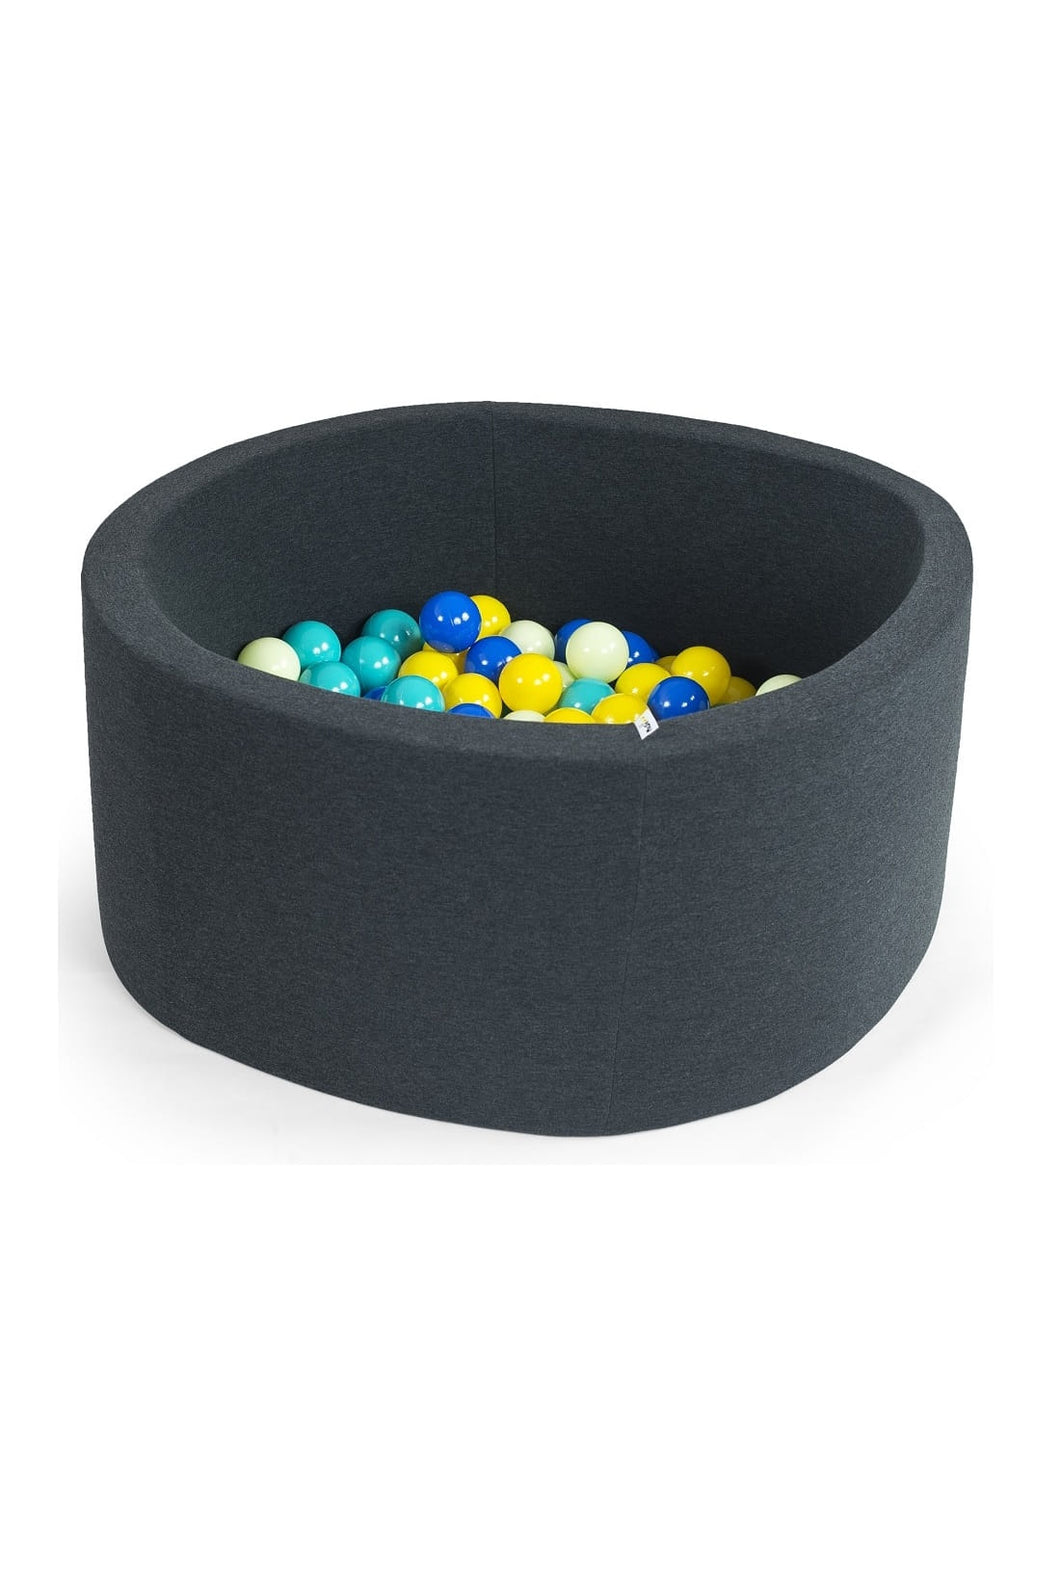 Misioo Ball Pits Round Graphite Large 100 X 40 1